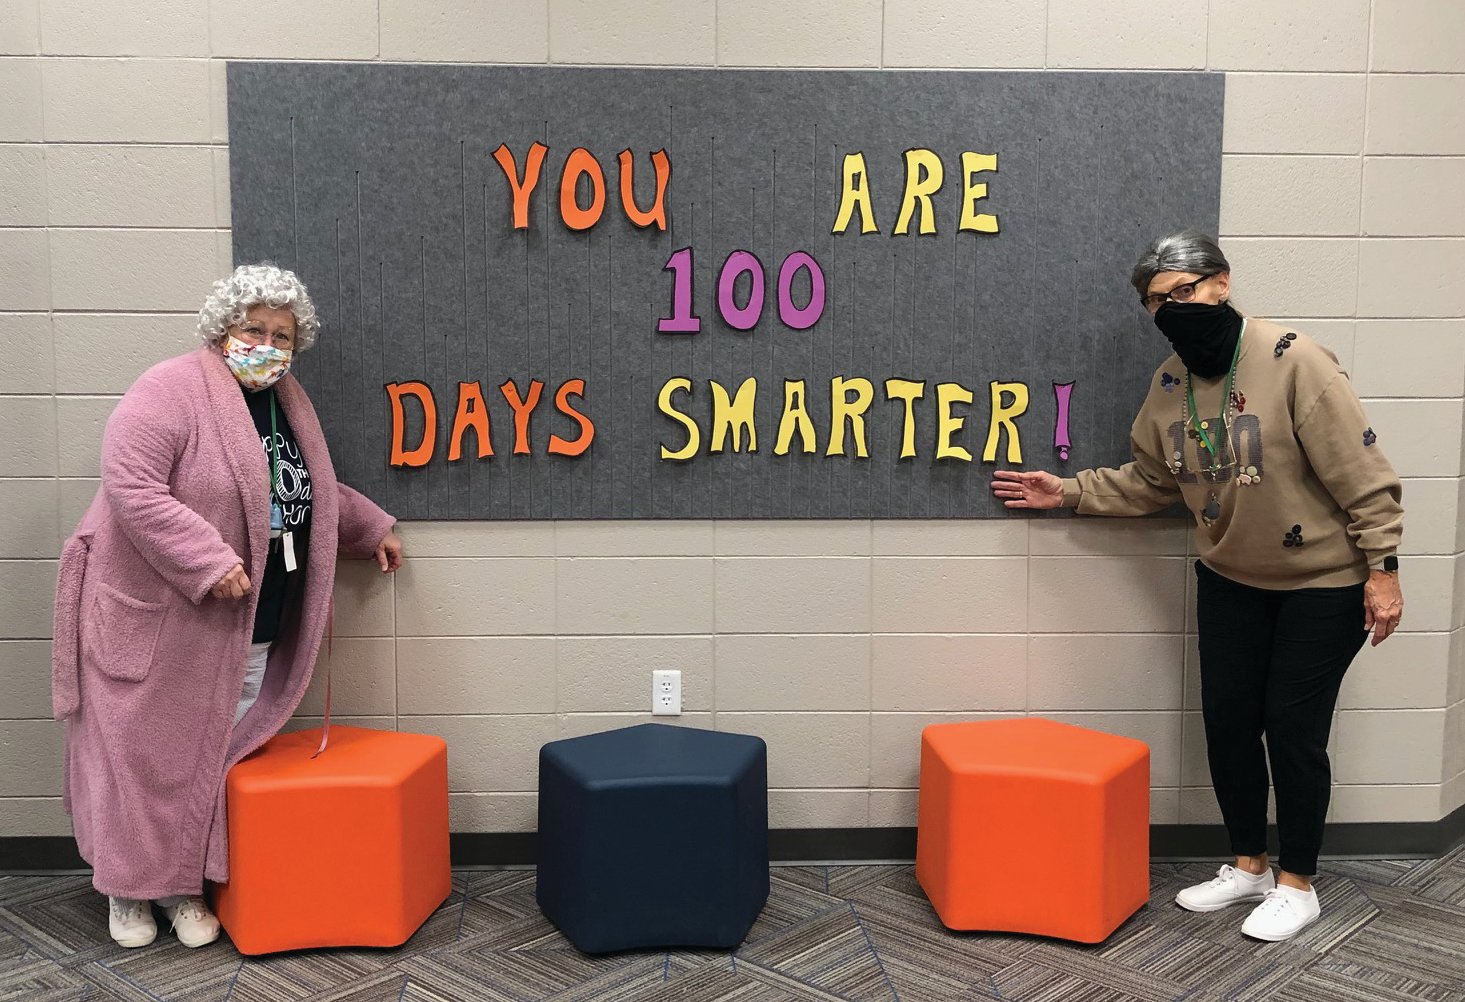 Local schools celebrated the 100th day of in-person classes Thursday with a dress-up day and special activities.